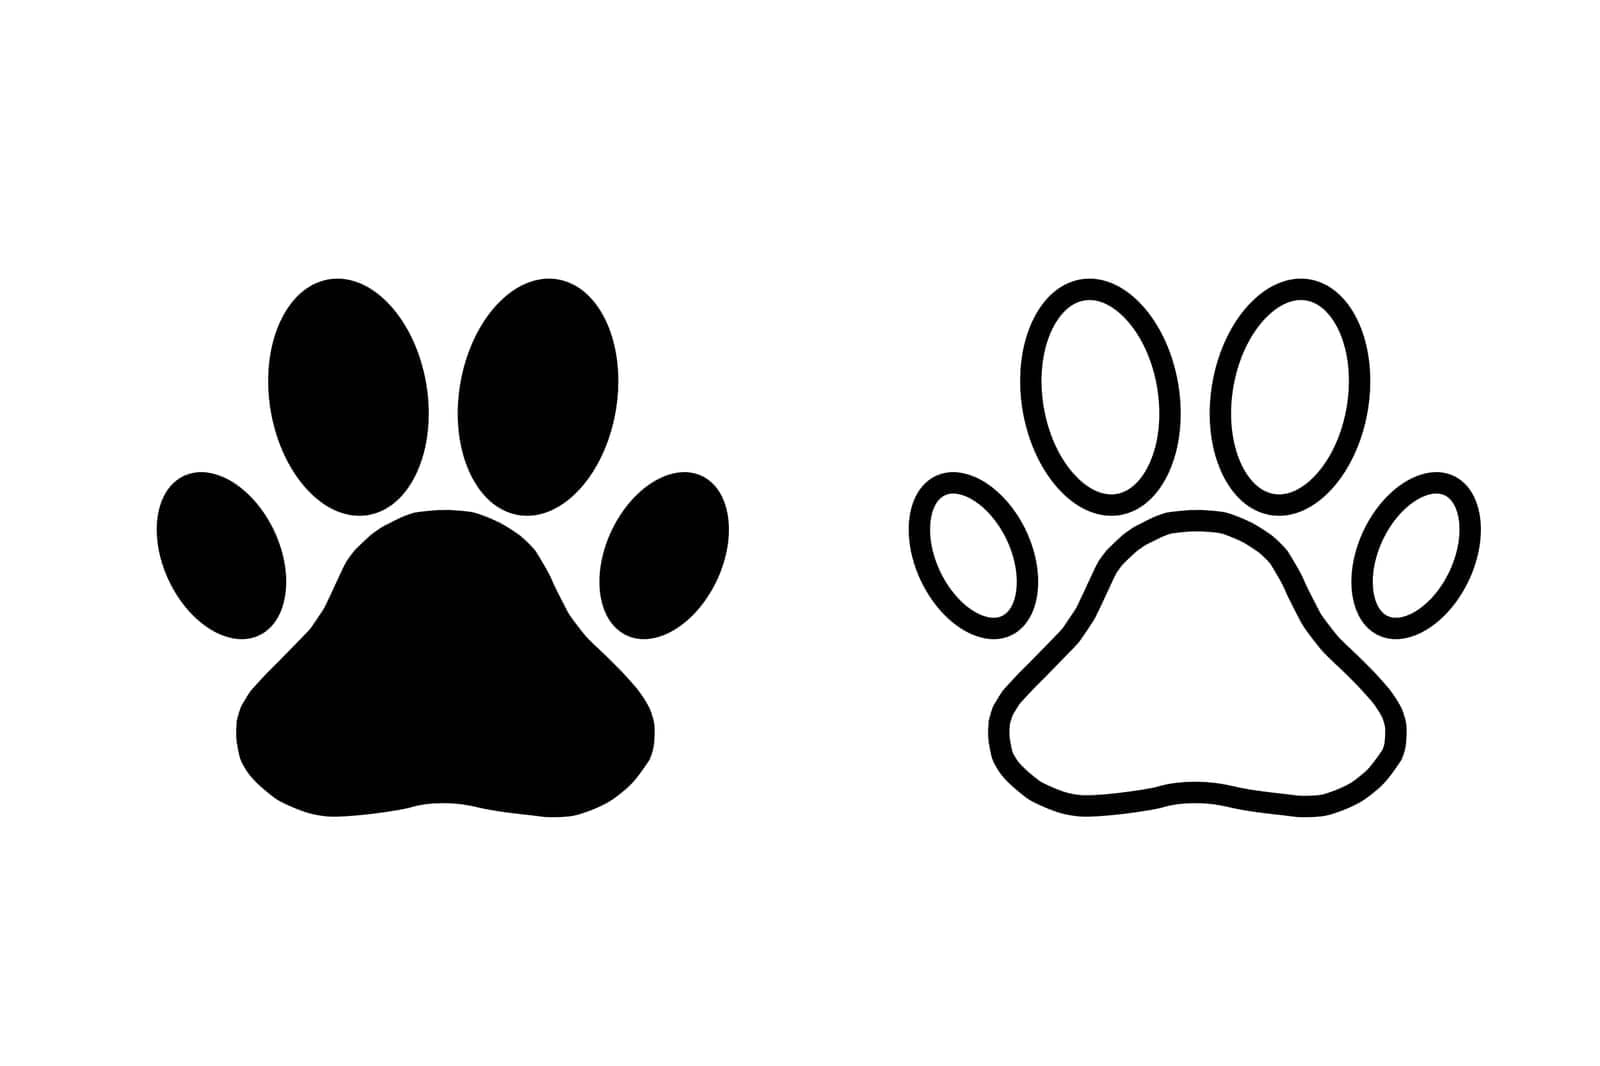 Paw print icon simple design by misteremil